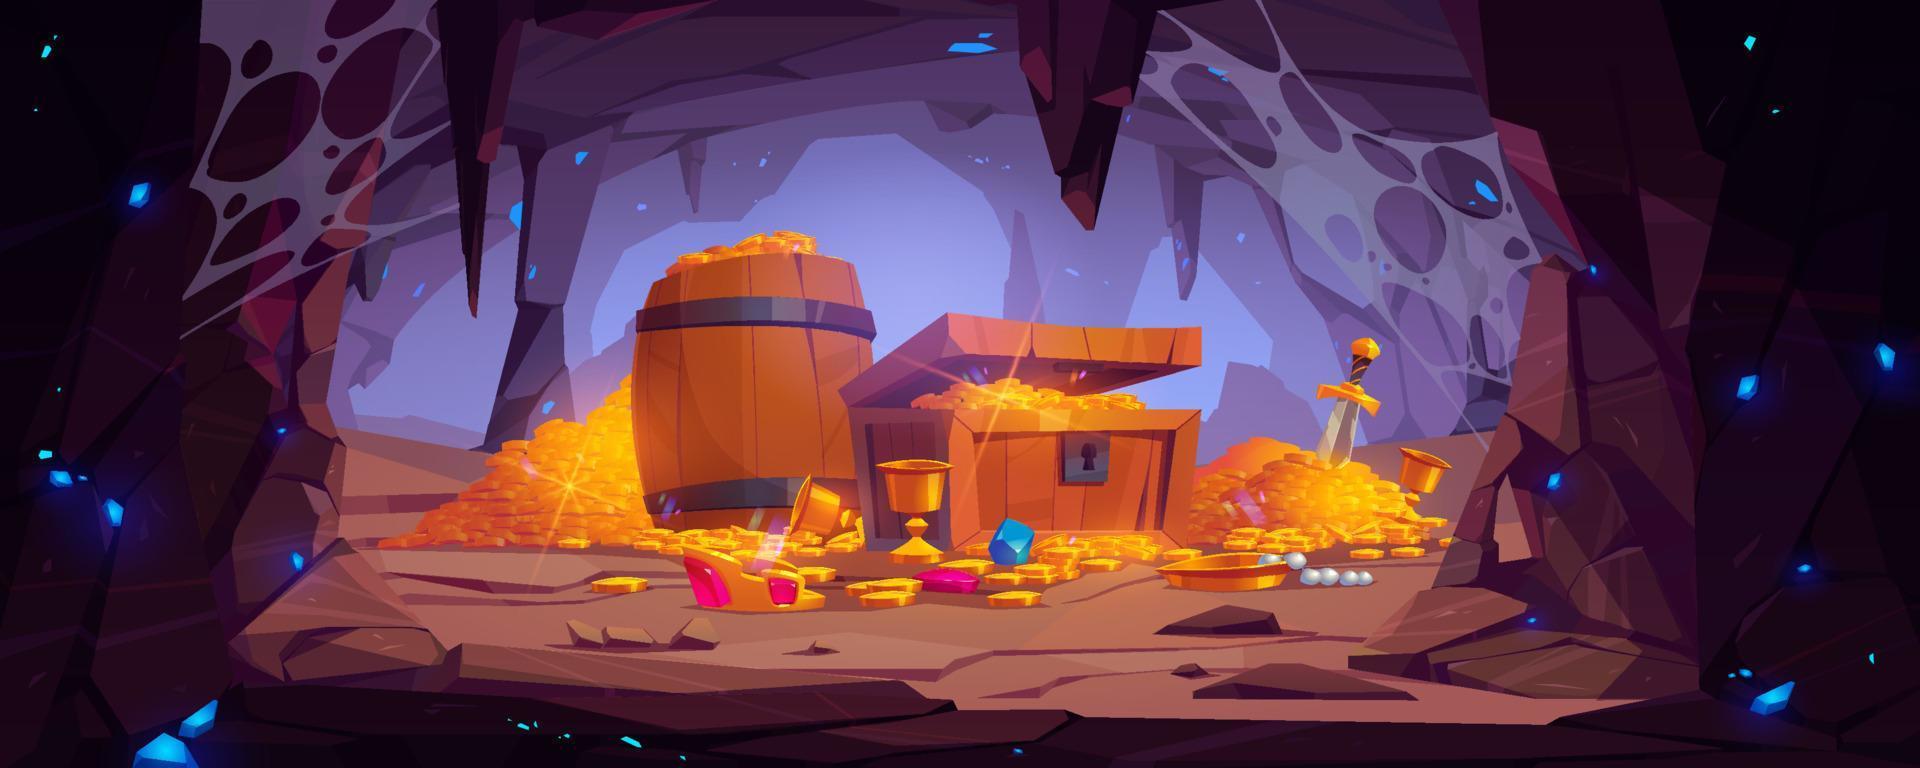 Treasure cave with gold coins in chest and barrel vector